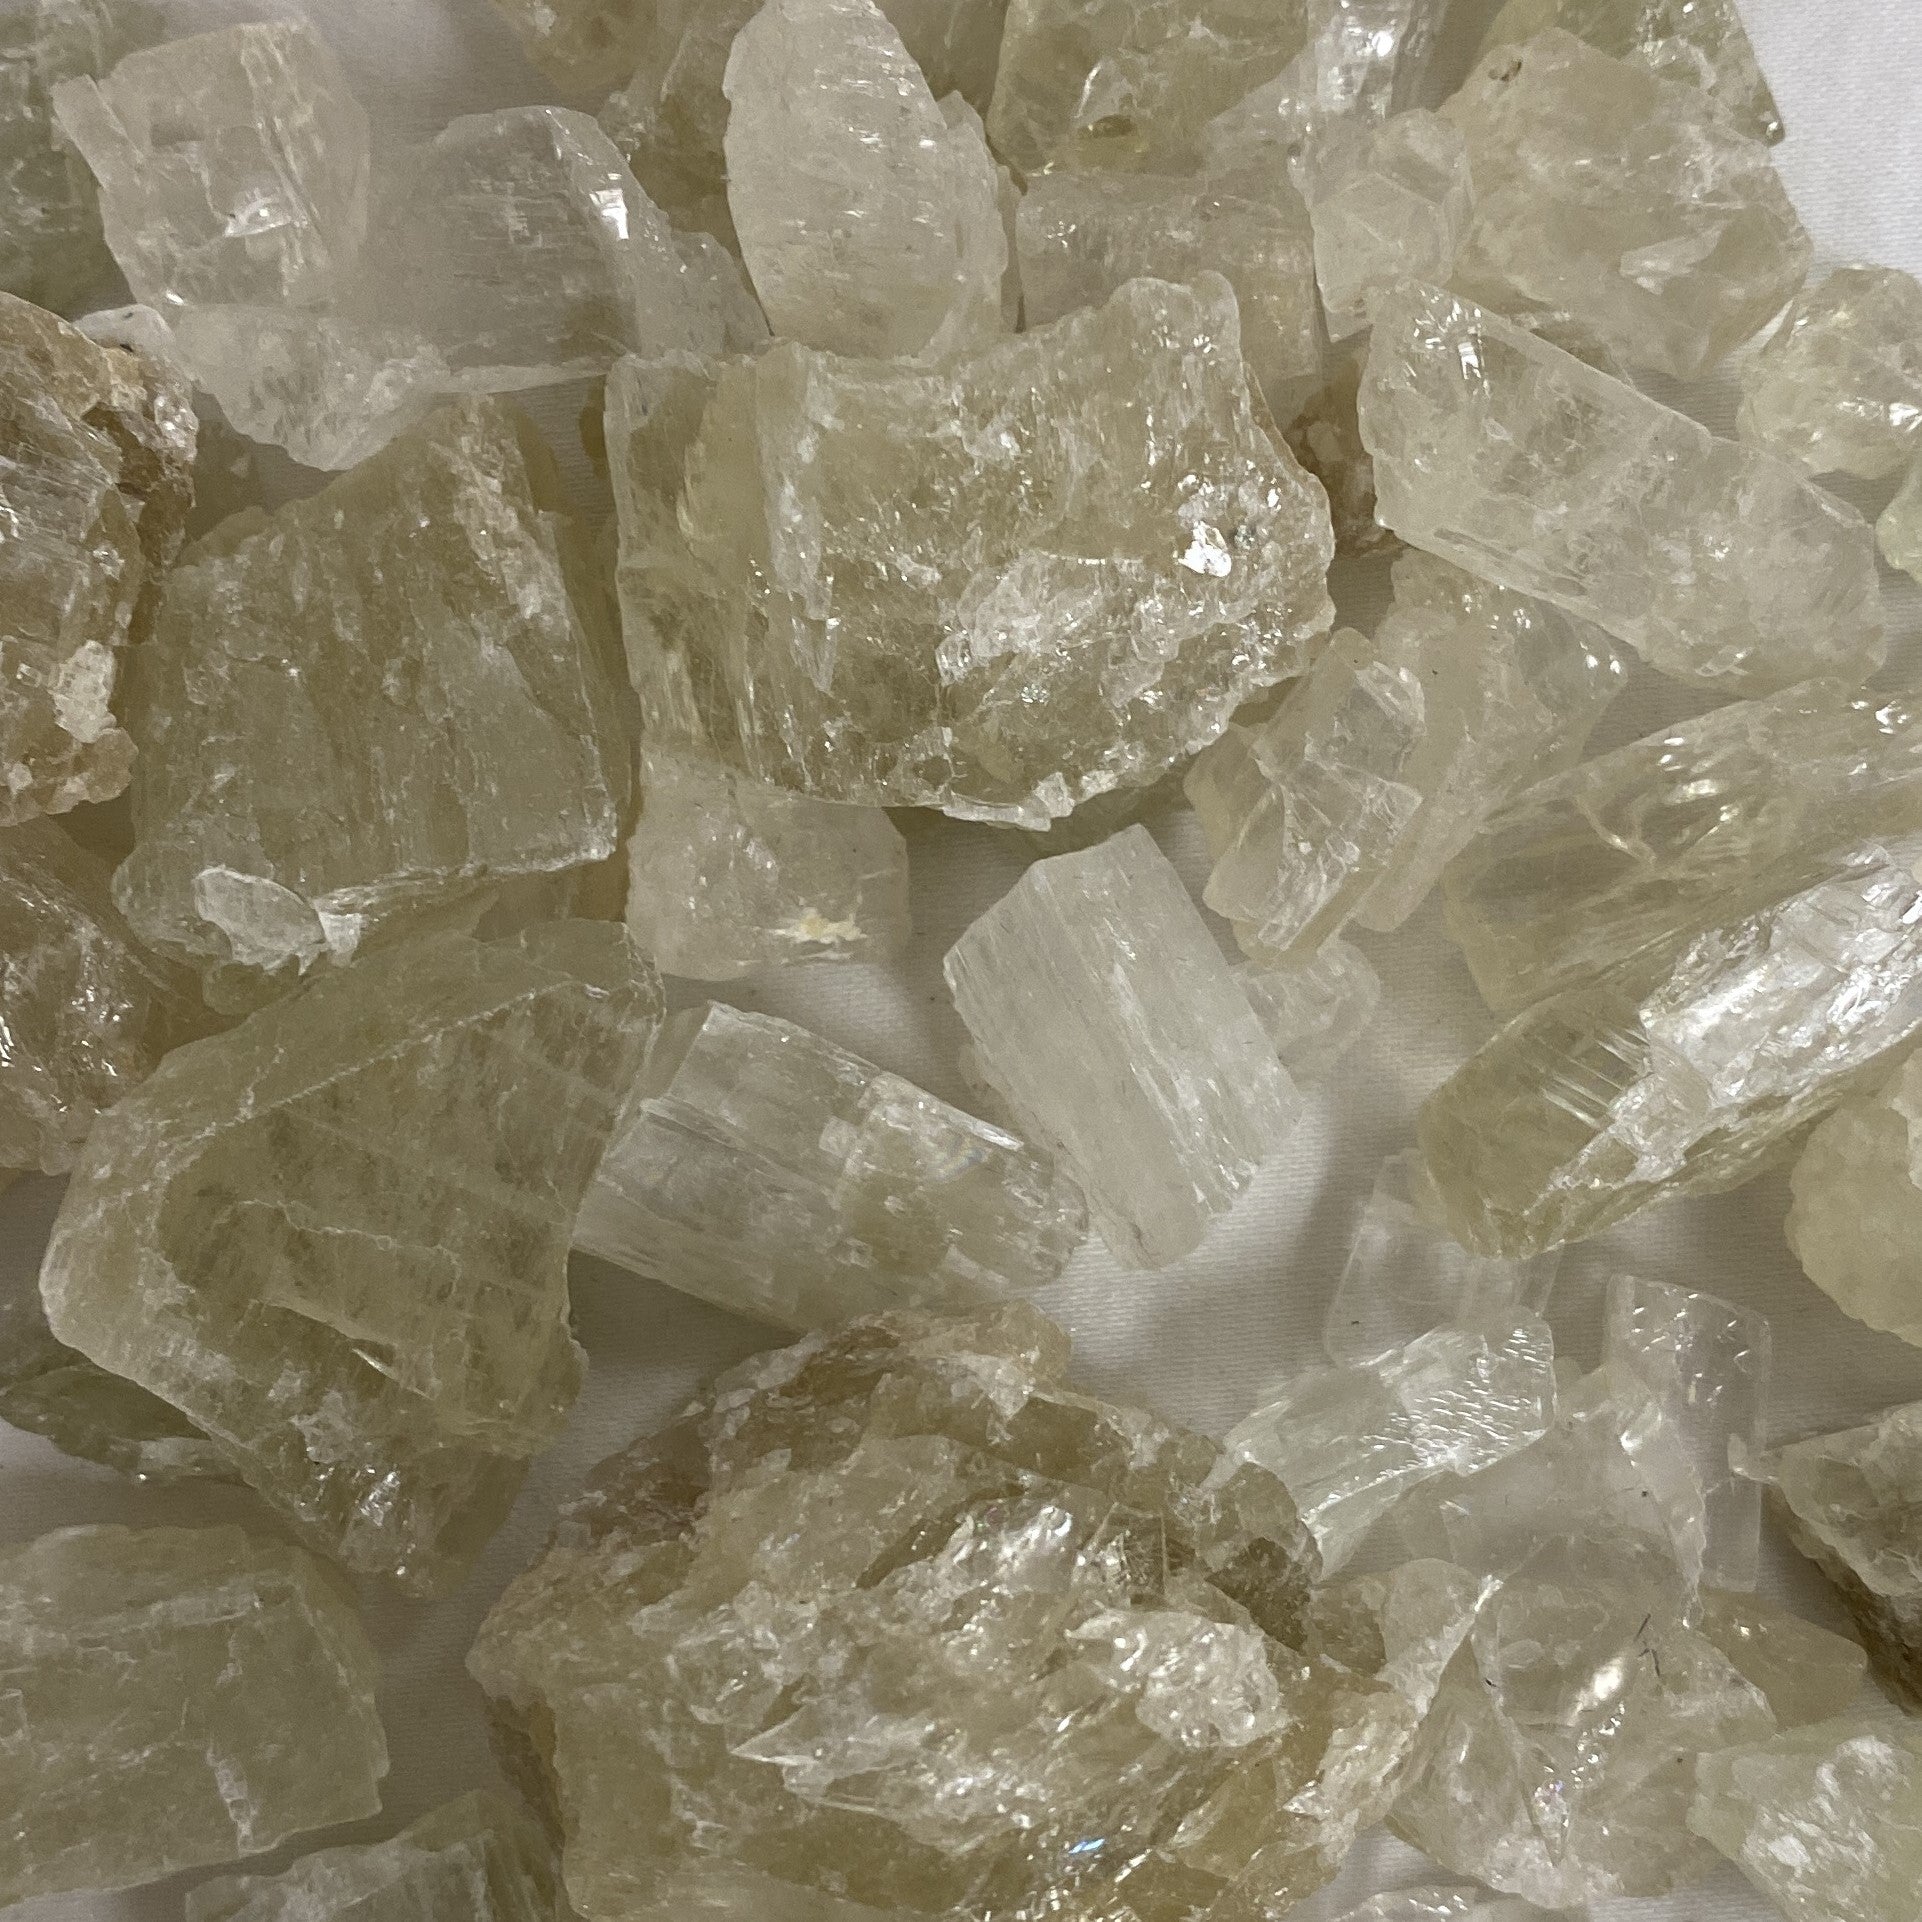 Close-up of a cluster of raw Hiddenite stones with a natural, rough texture and a vibrant green color. The stones are irregular in shape and size, with some showing signs of cleavage and others with smooth, rounded surfaces.